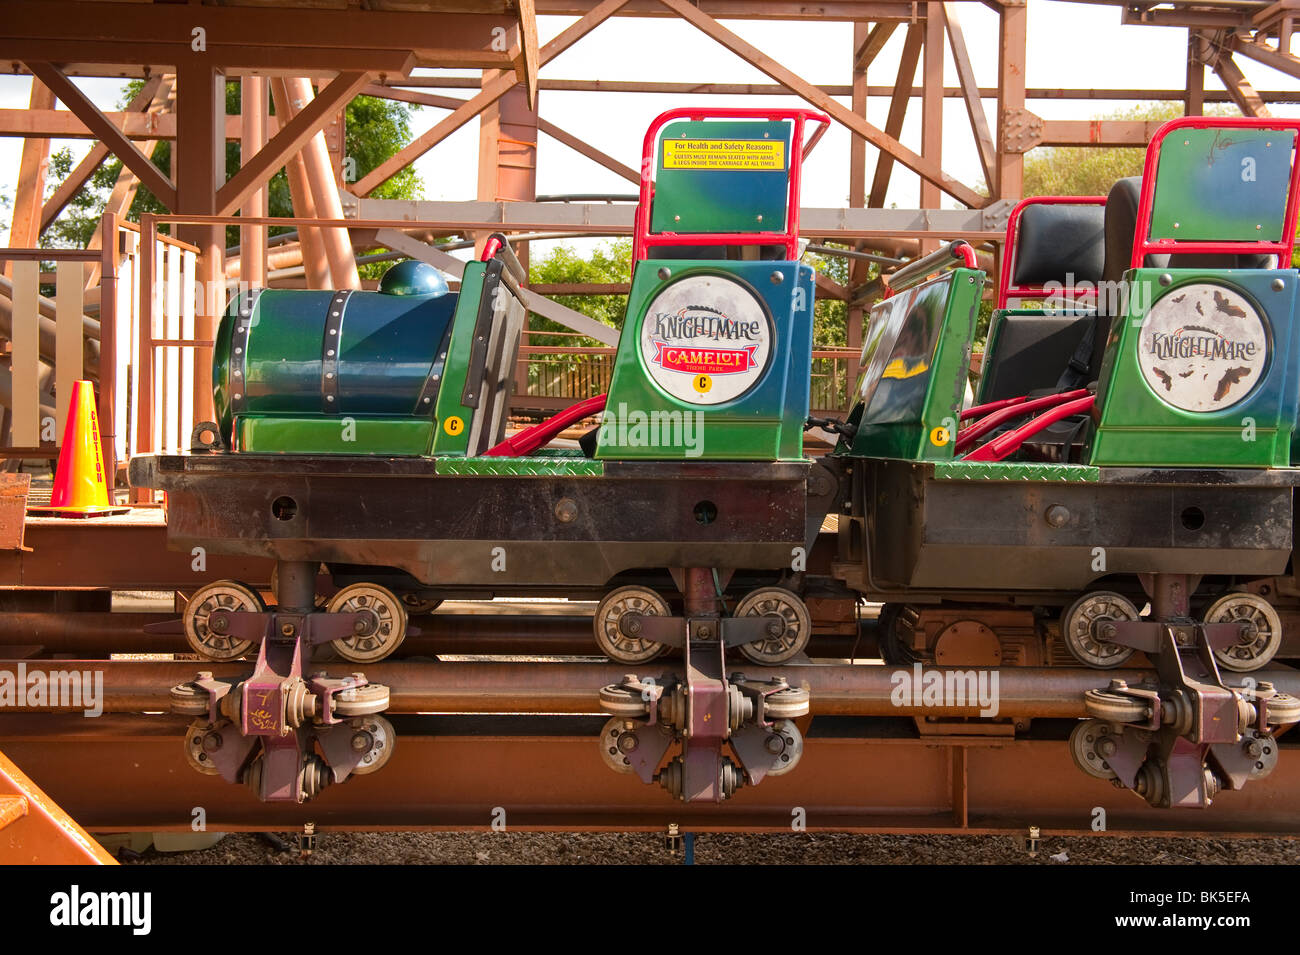 Roller coaster cars and train wheels on tracks Stock Photo